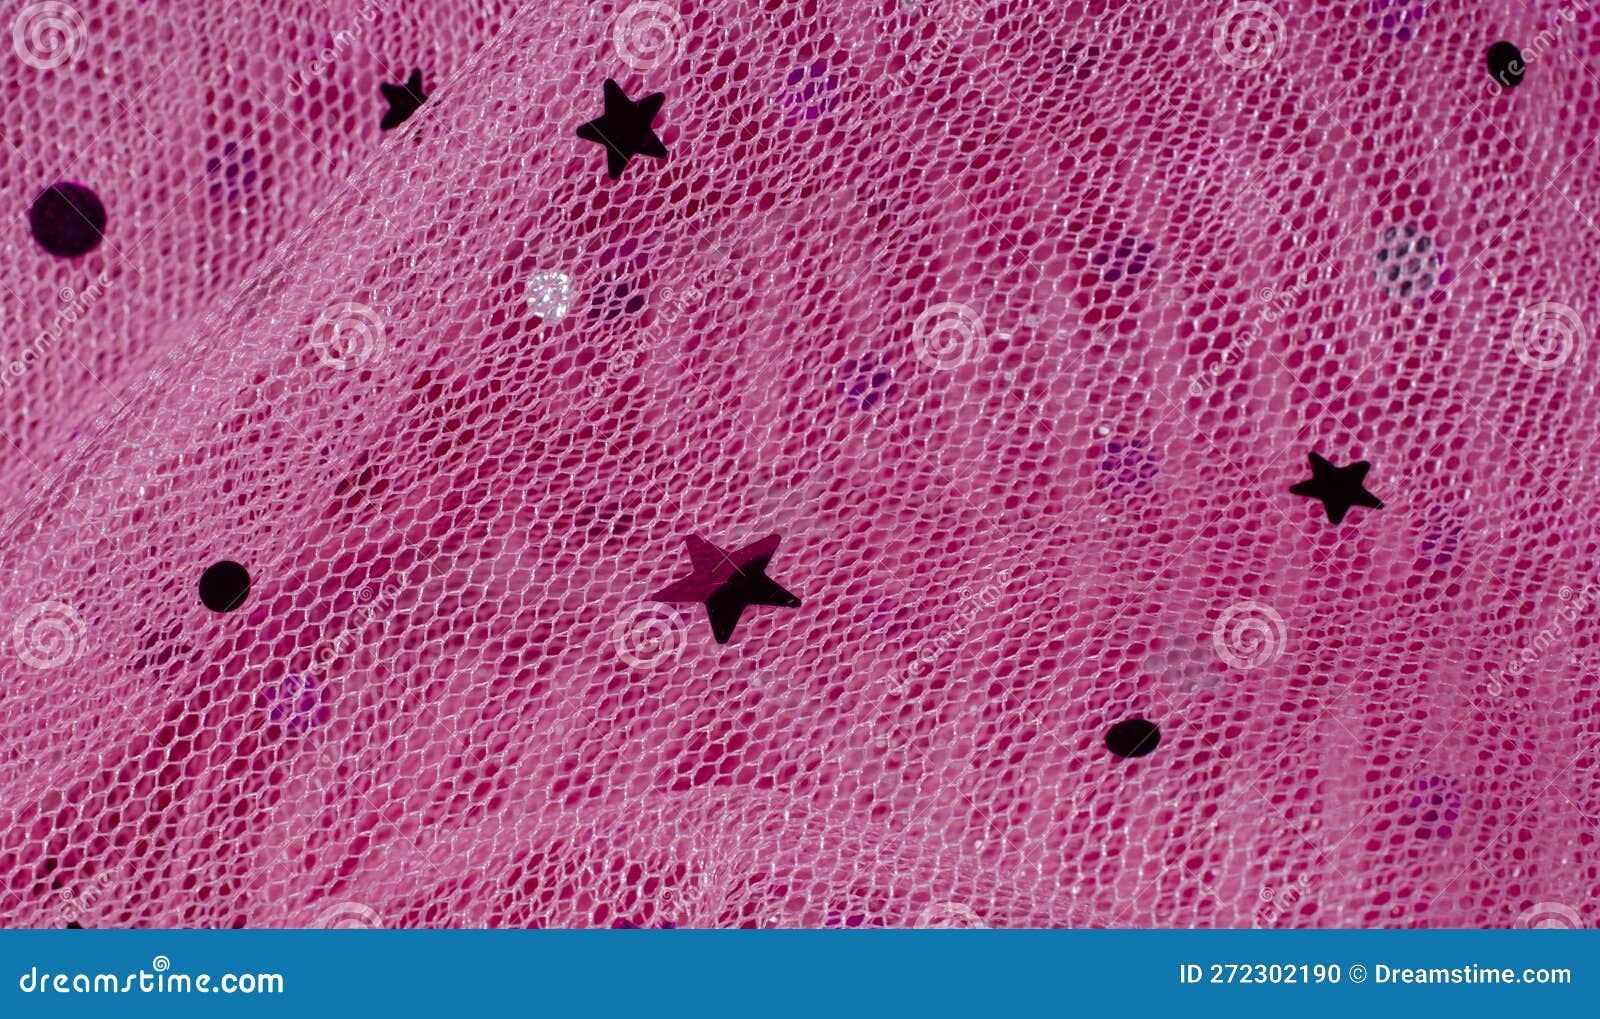 Net Fabric with Embellishment of Star and Circle. Pink Colorful